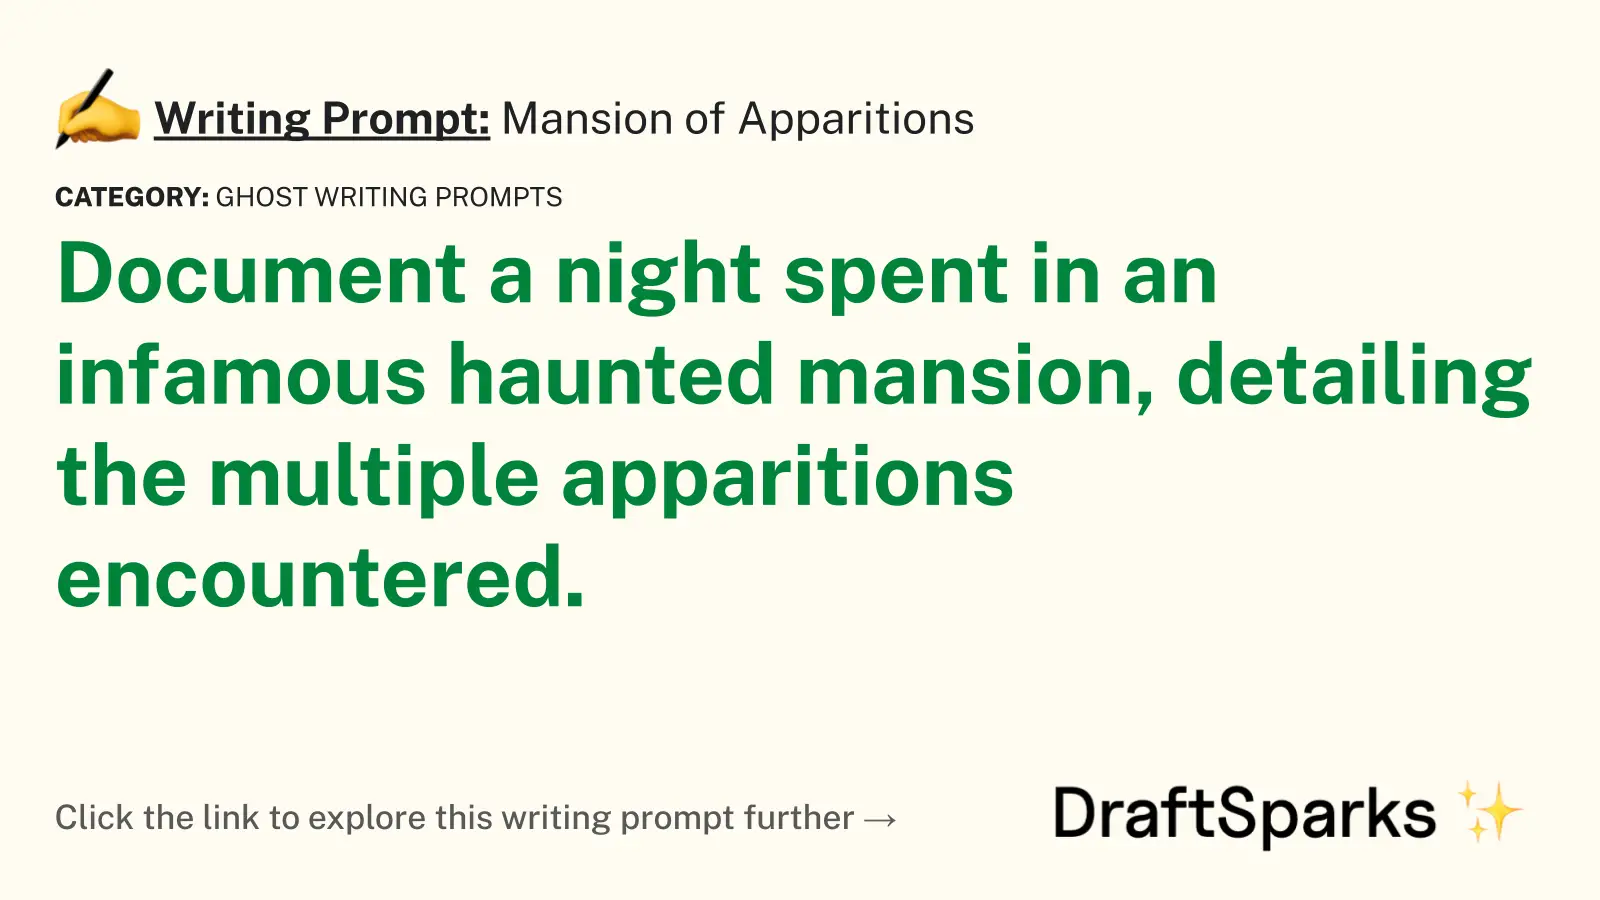 Mansion of Apparitions